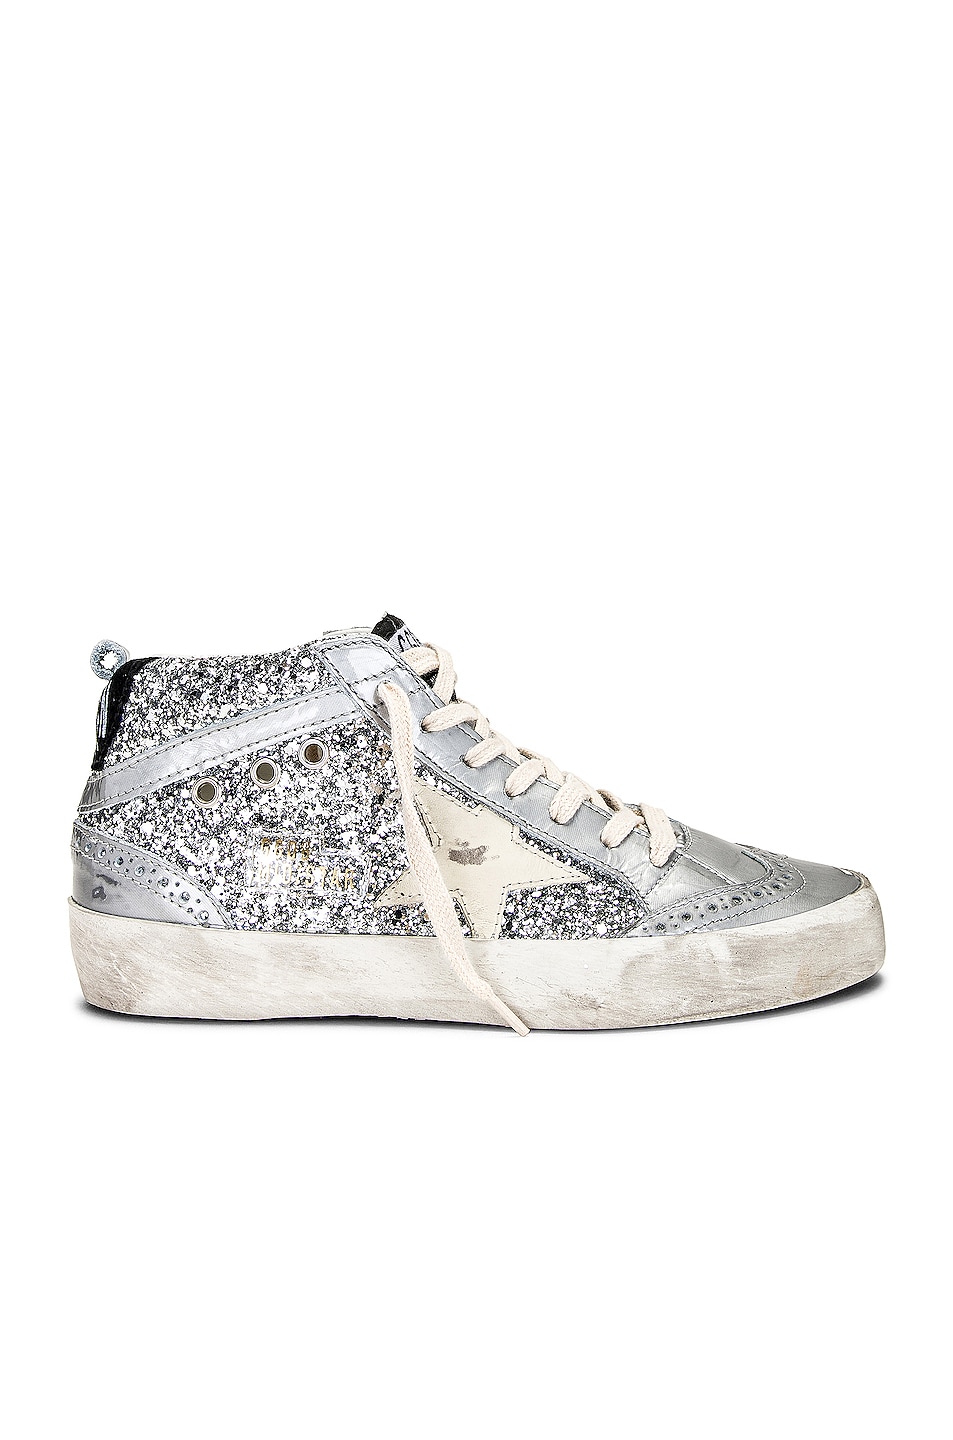 Image 1 of Golden Goose Mid Star Sneaker in Silver, Ivory, & Black